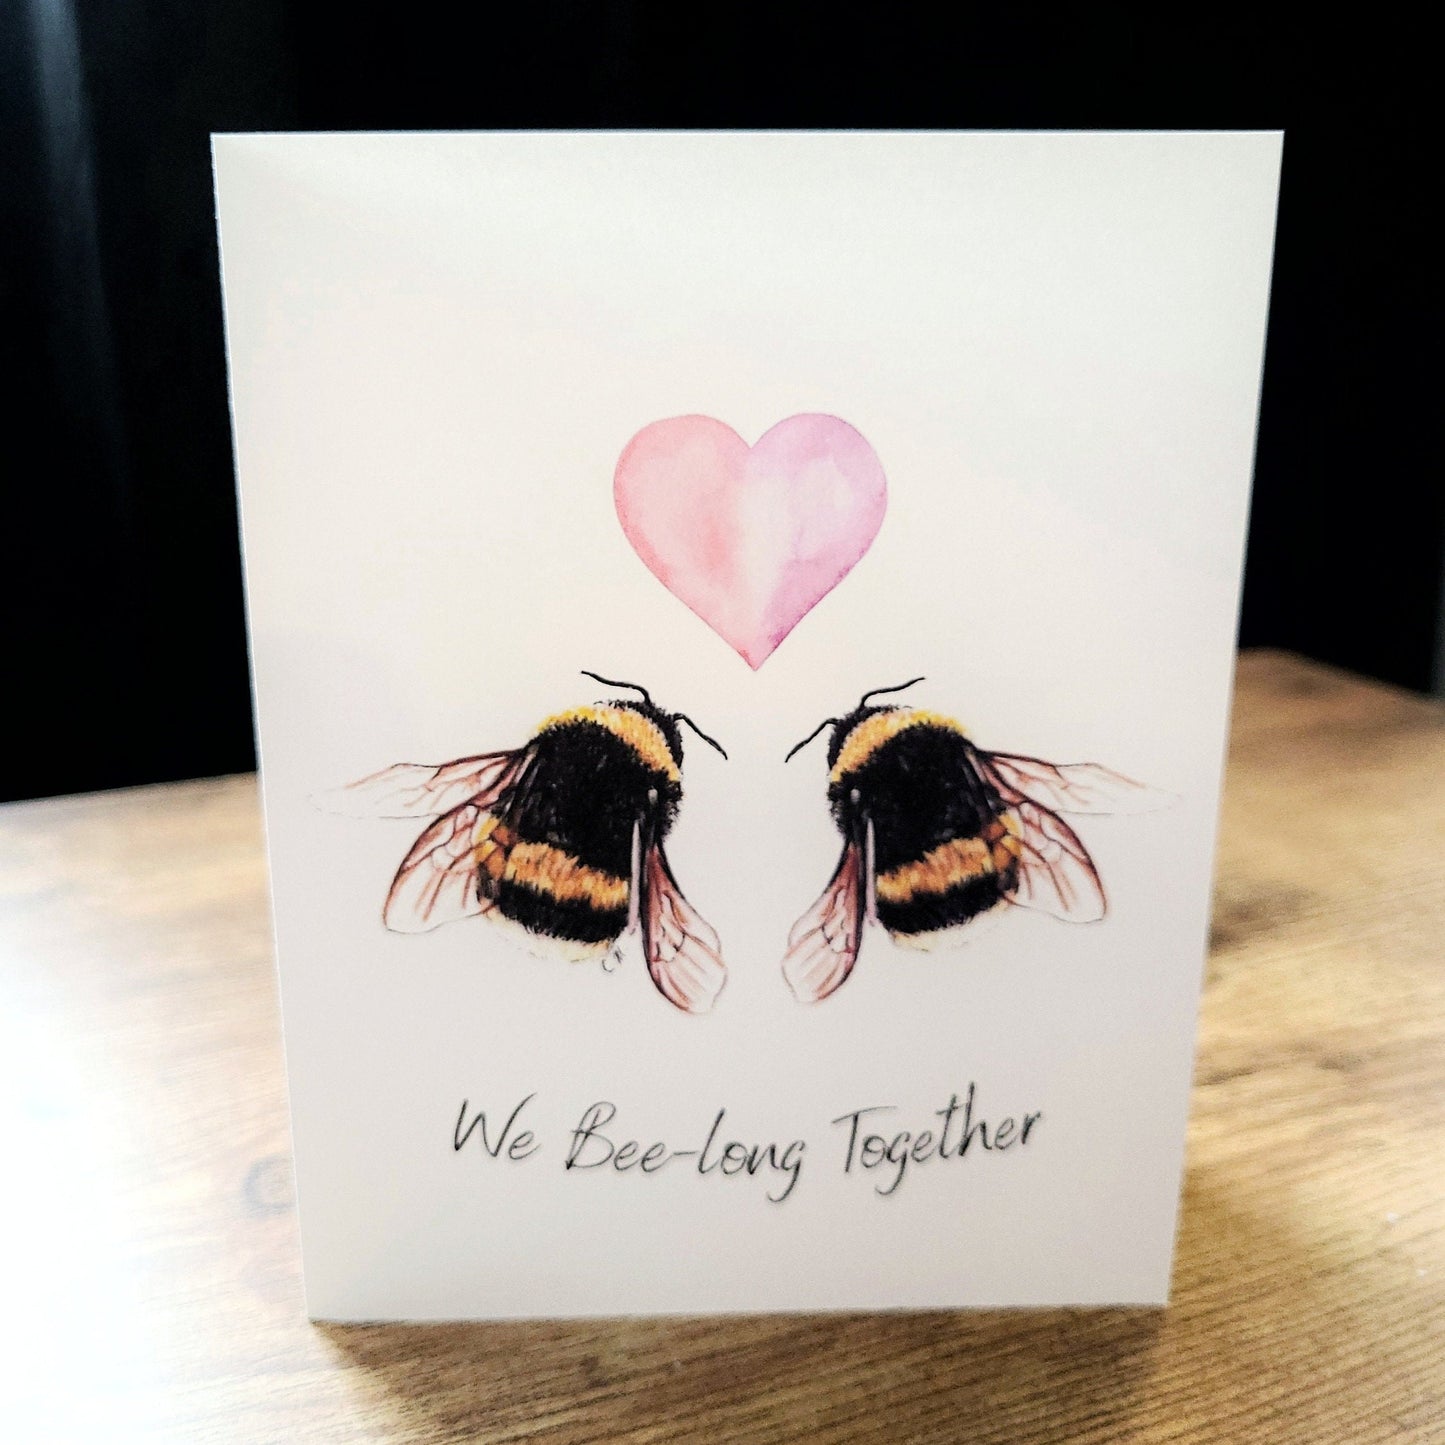 We Bee-long Together Greeting Card, Cute bee lover card, Punny, Funny card for him her, Girlfriend, Boyfriend, Anniversary, Valentines day